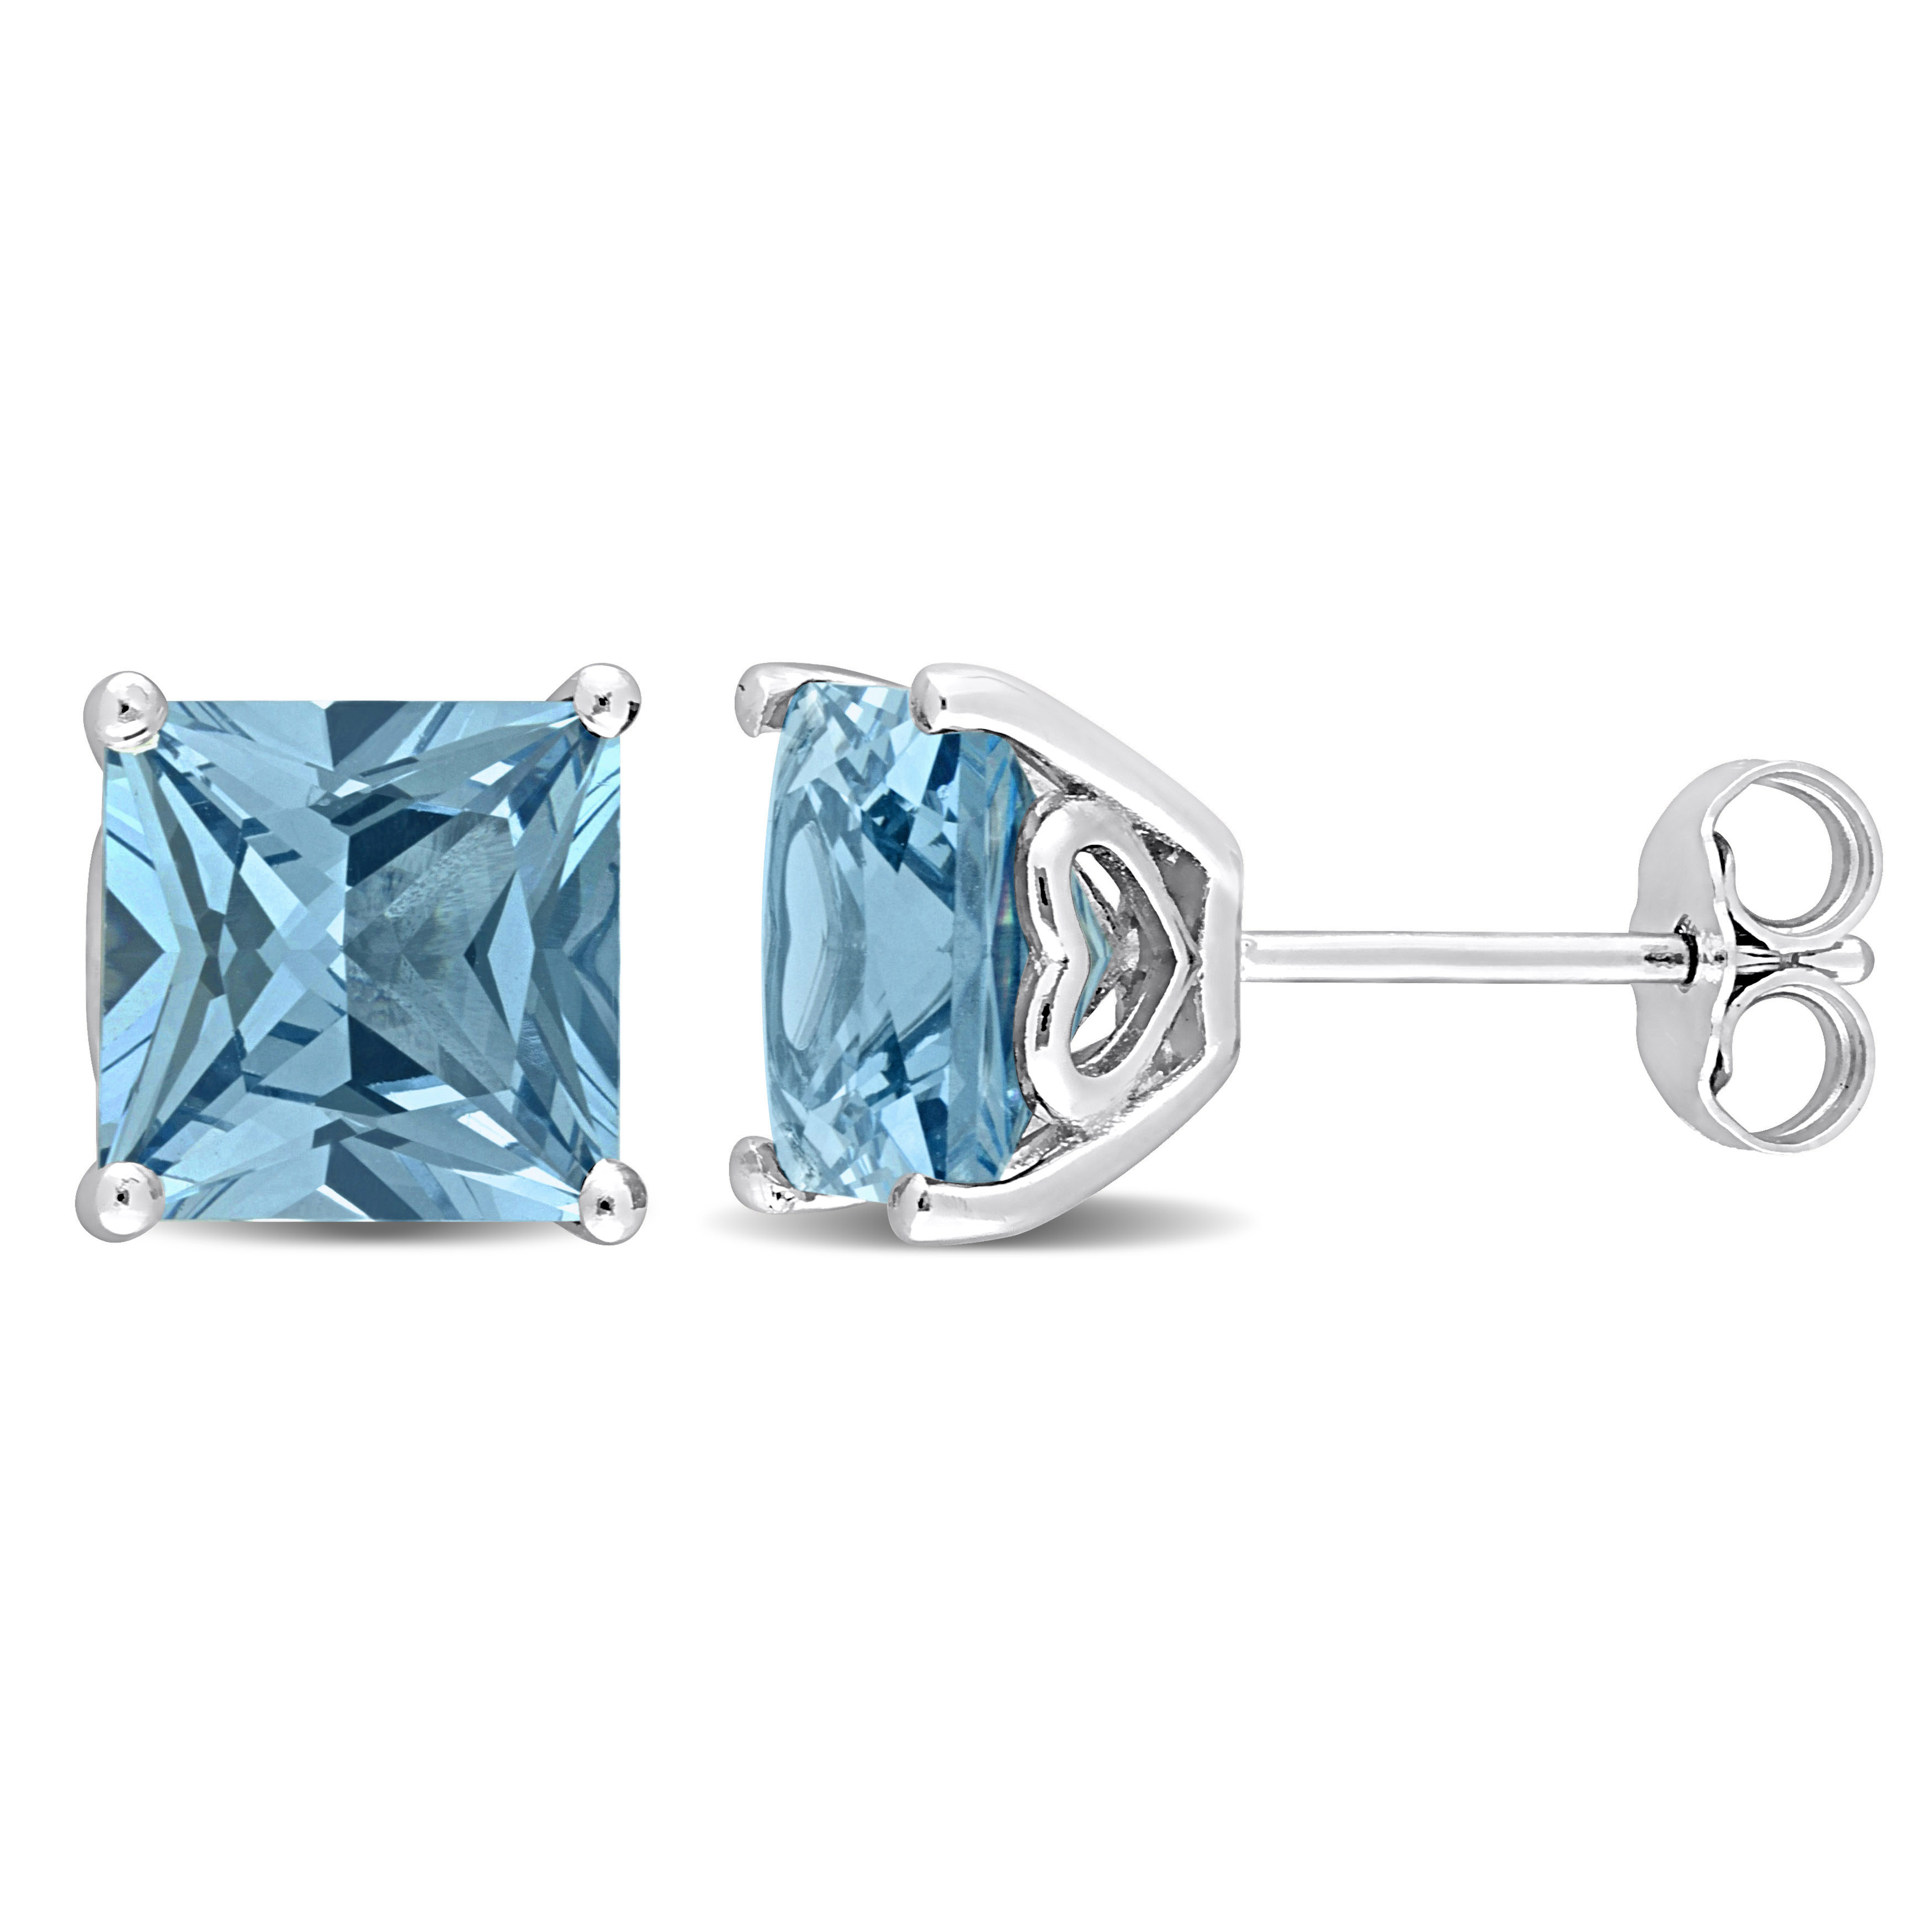 4 CT TGW Square Synthetic Spinel (Aquamarine) Earrings in Sterling Silver